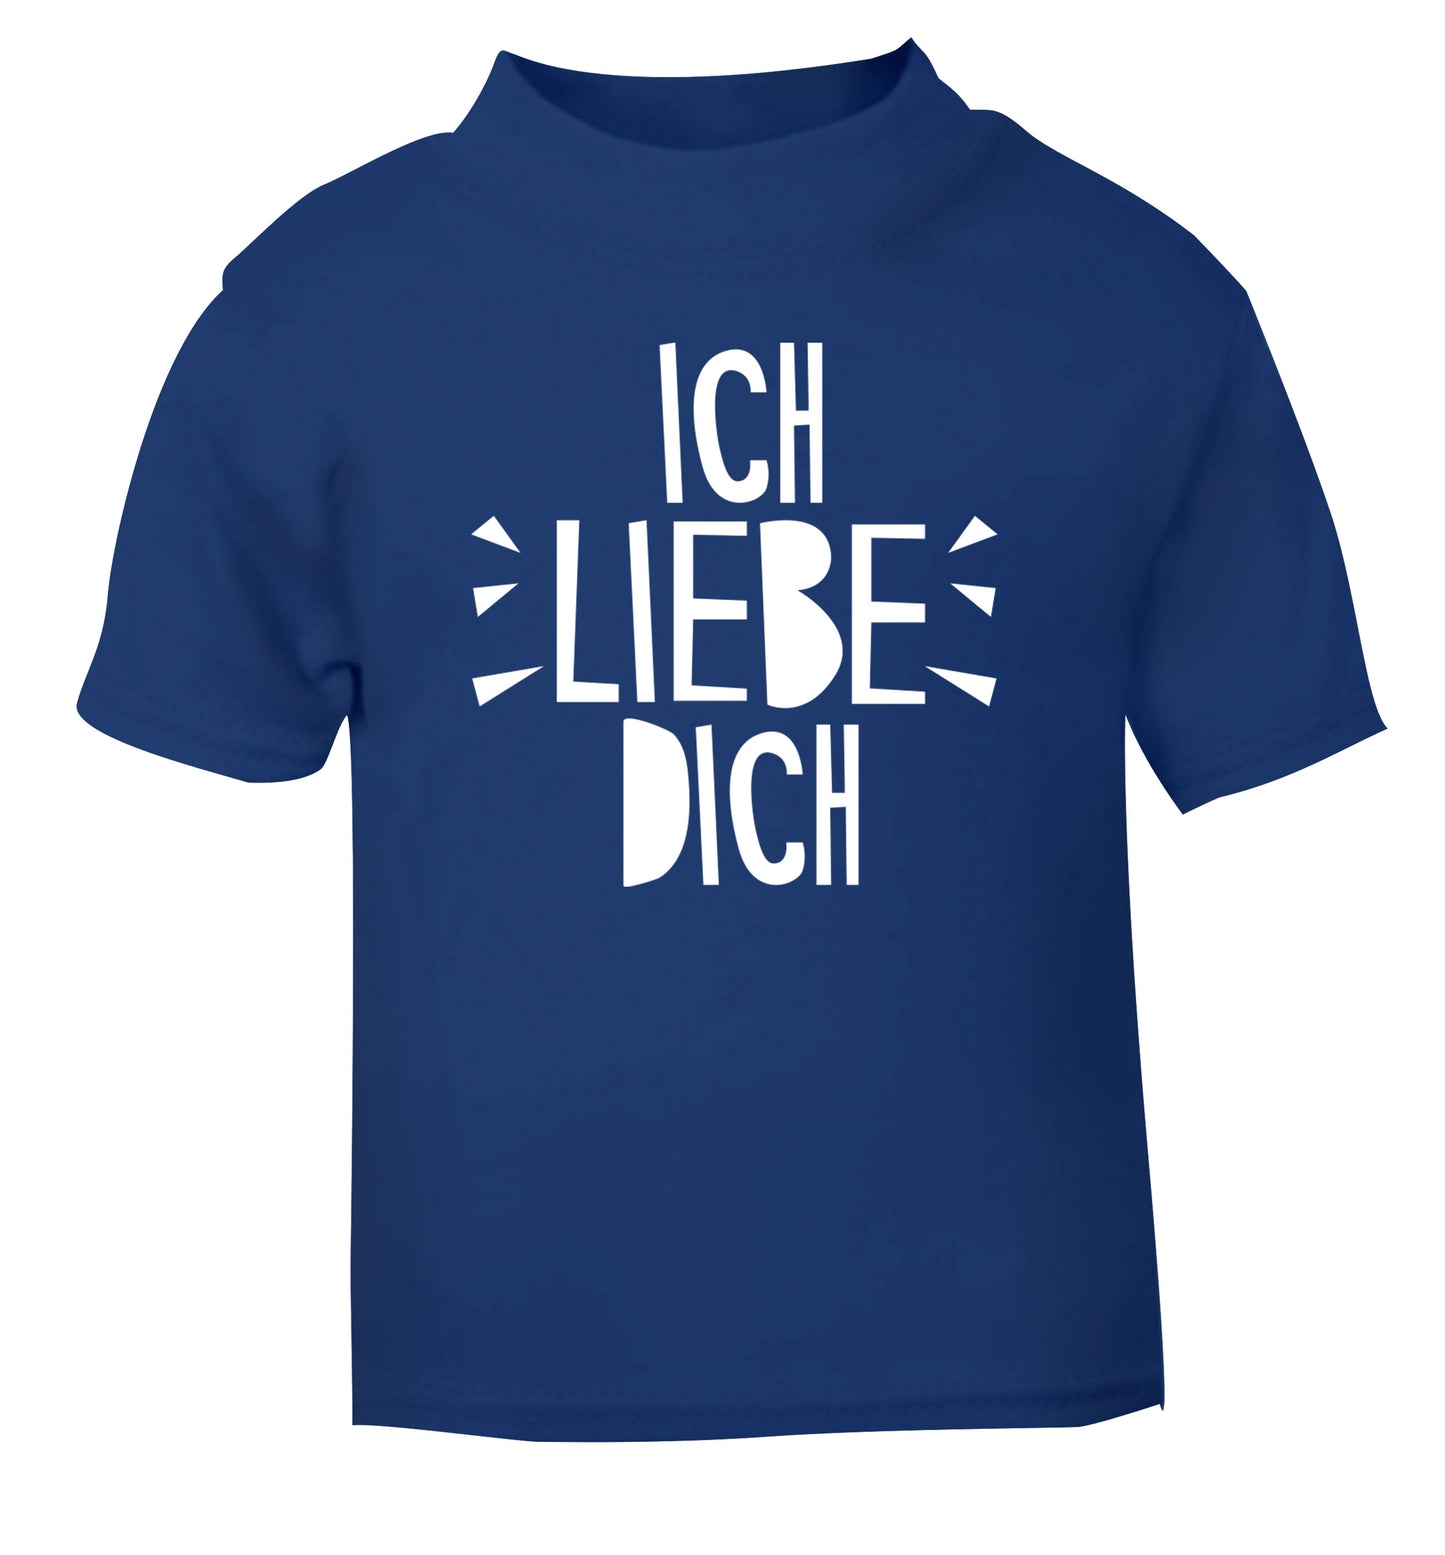 Ich liebe dich - I love you blue Baby Toddler Tshirt 2 Years